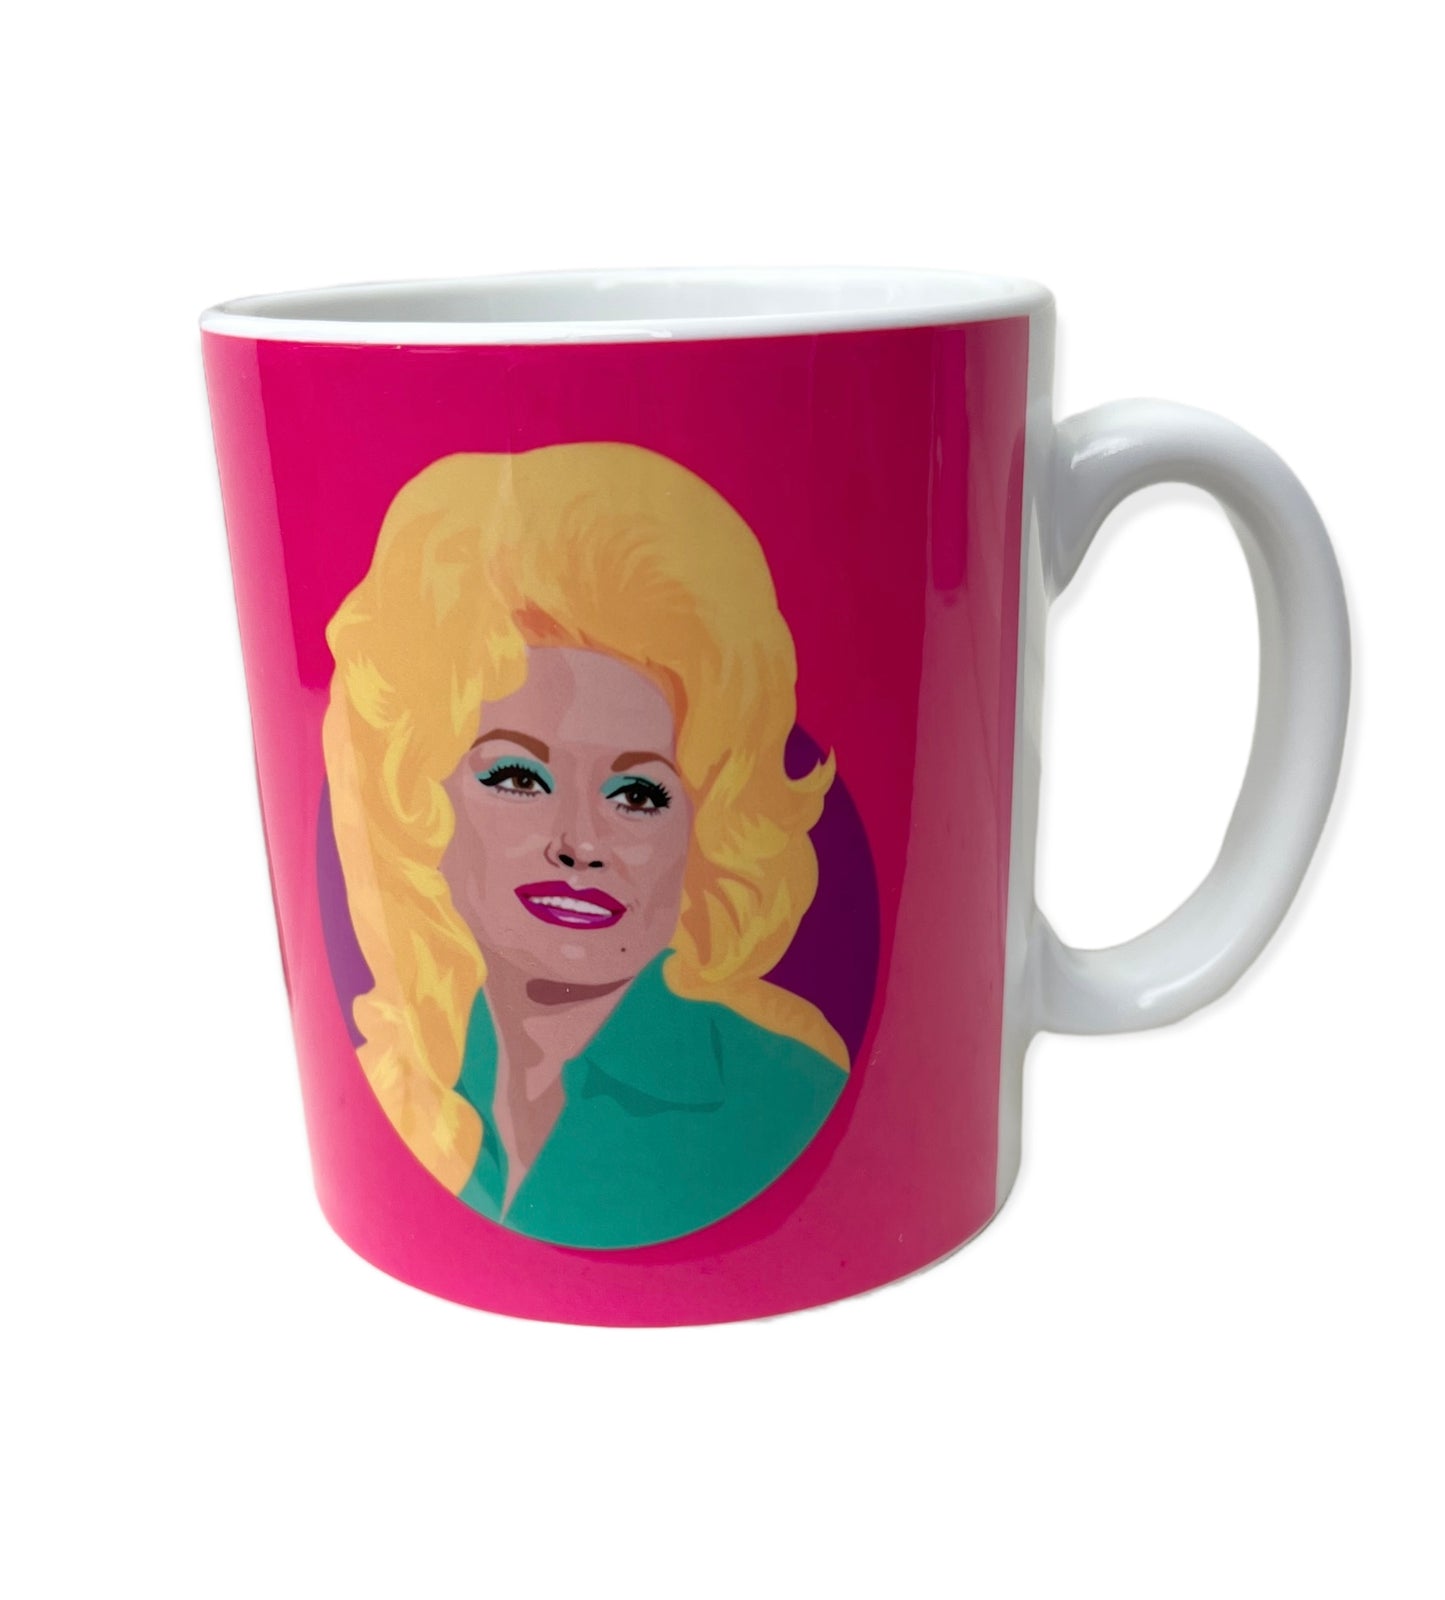 Load image into Gallery viewer, Mugs Dolly Parton - Hot Pink by Sabi Koz
